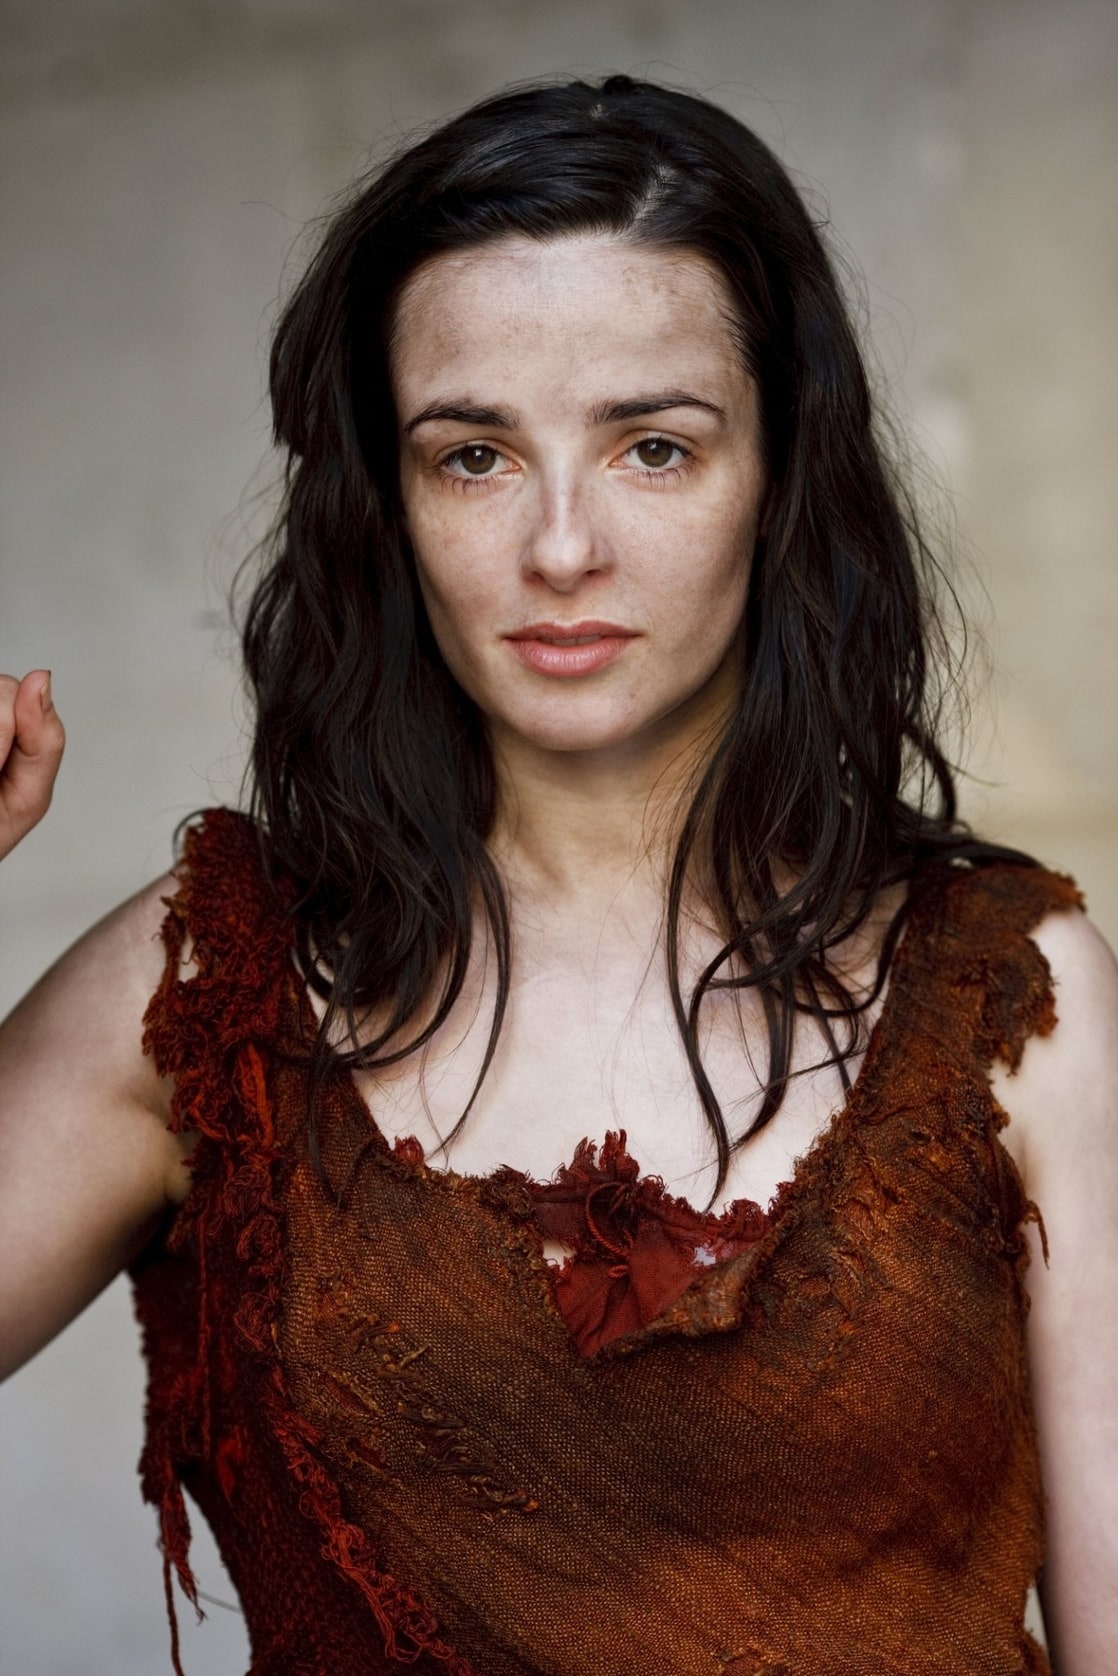 Laura donnelly sexy